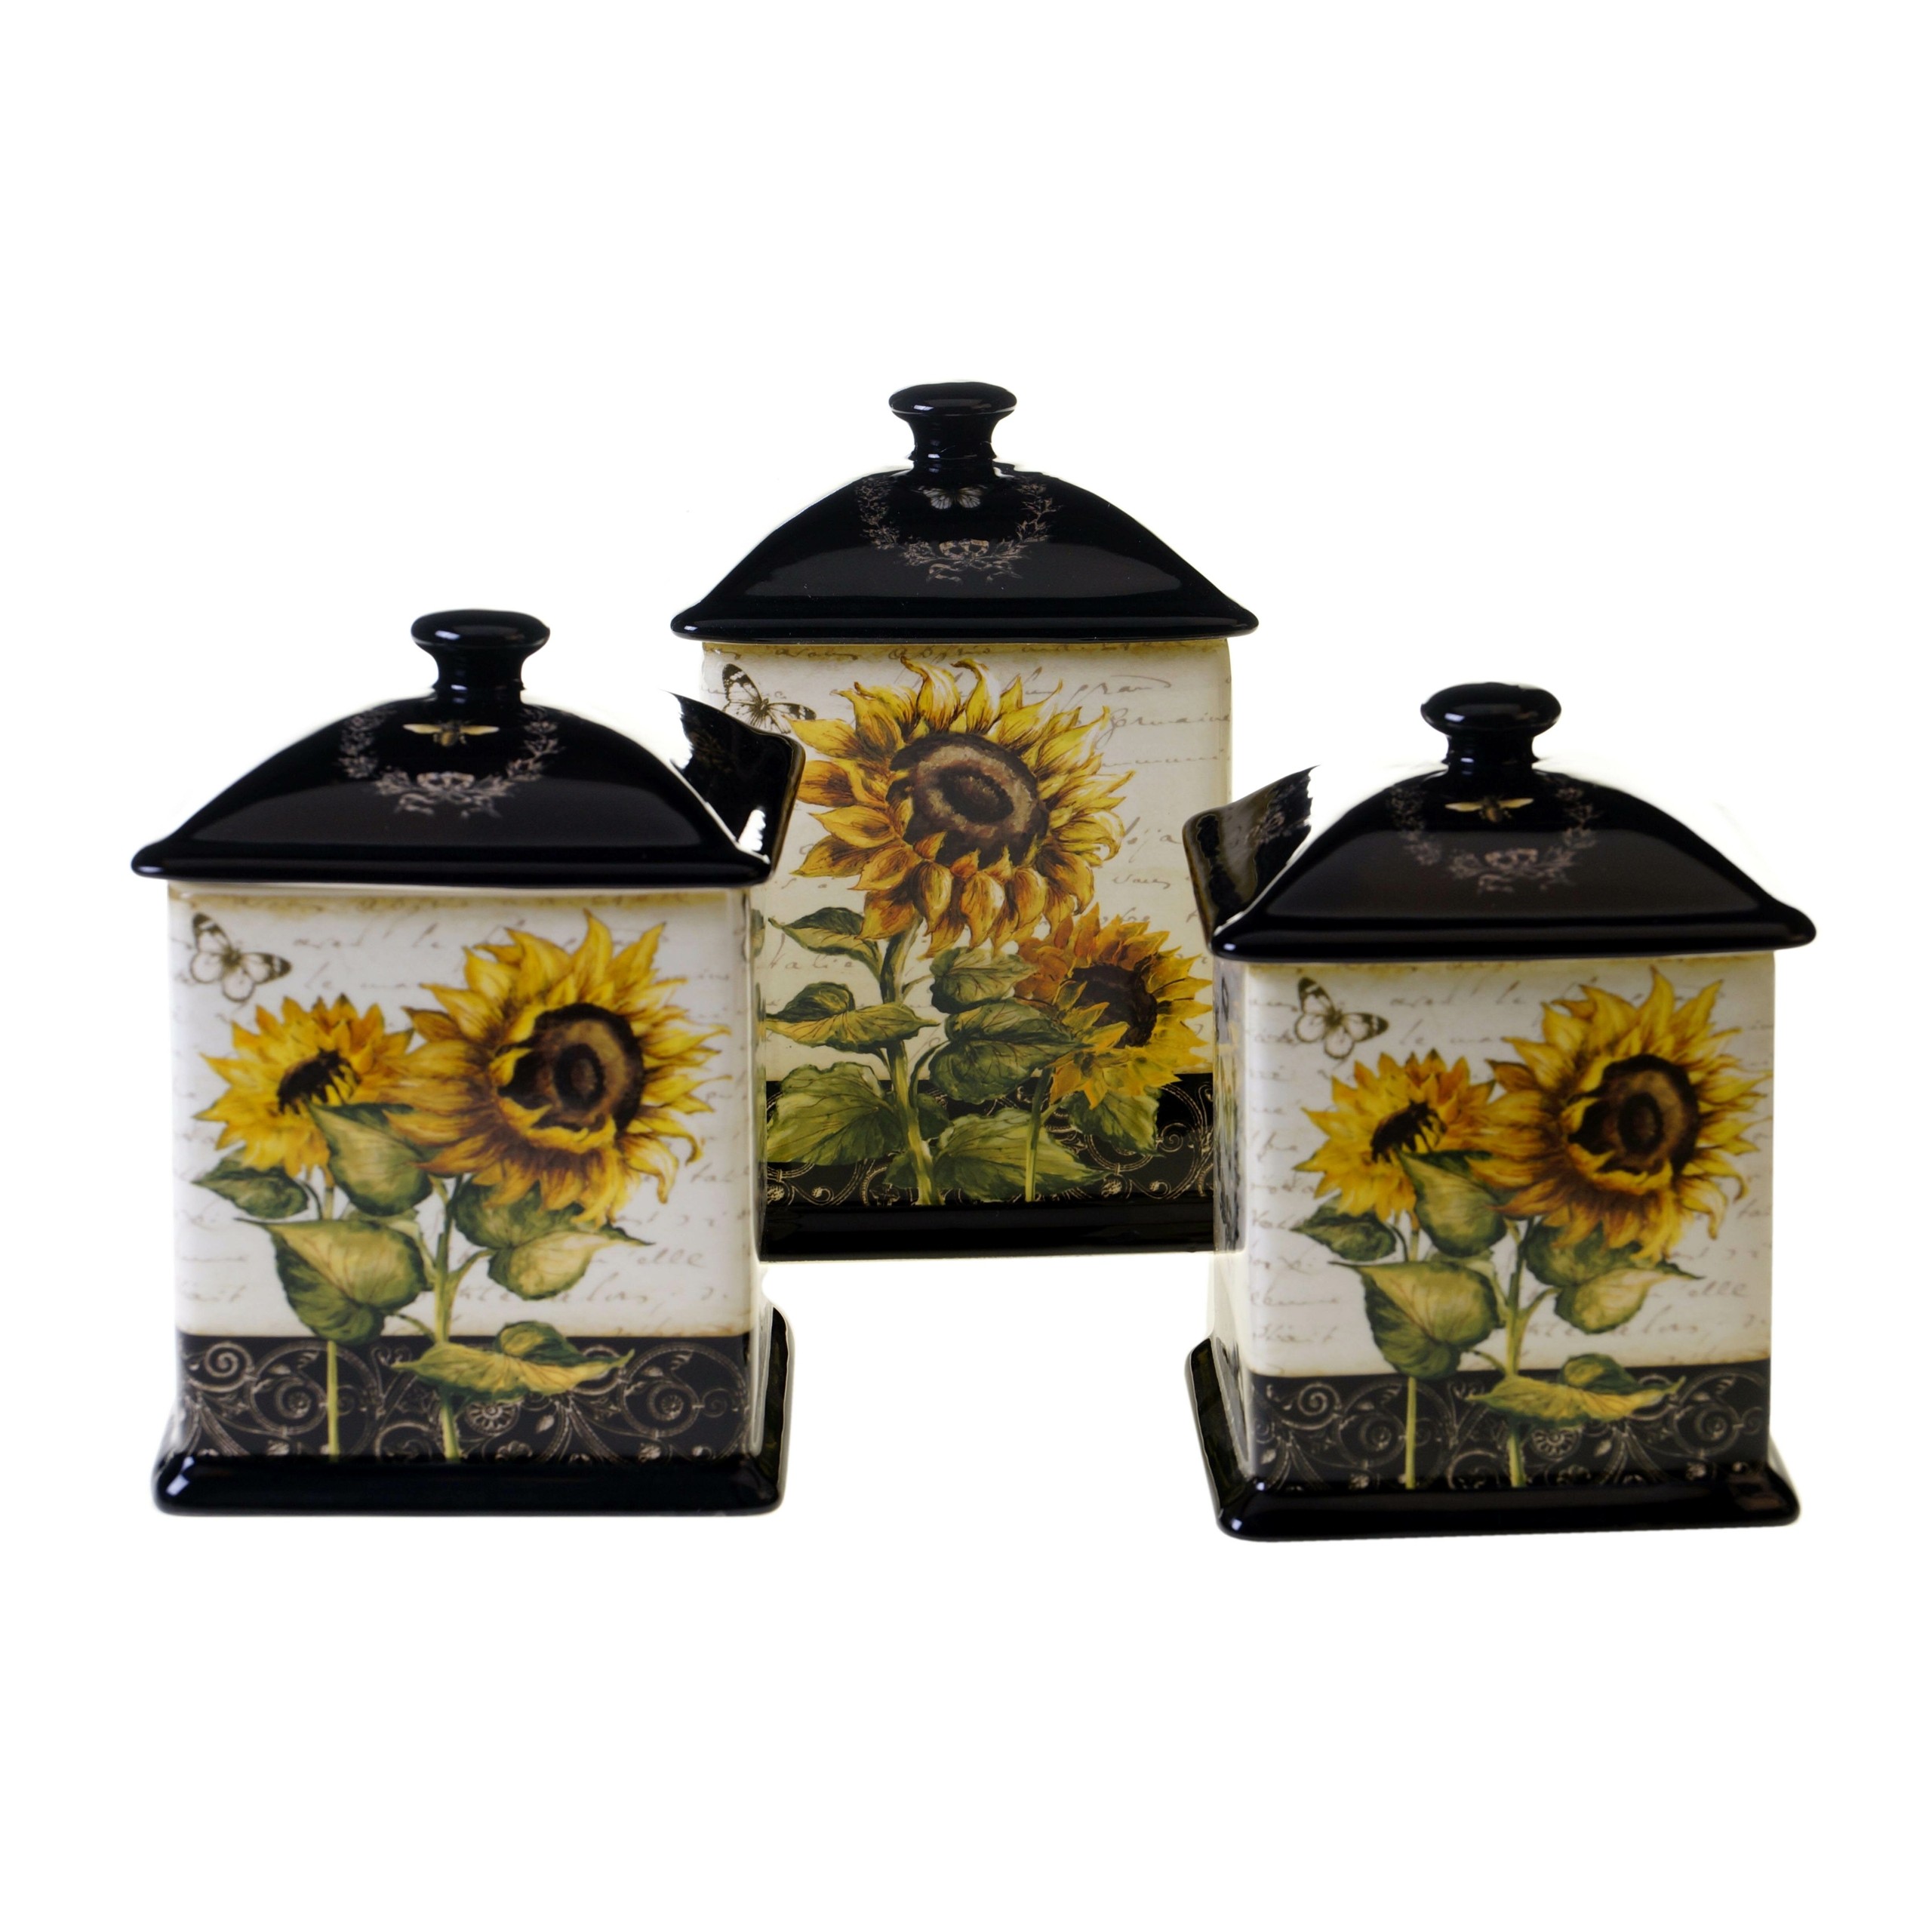 Three-piece Floral Kitchen Canister Set